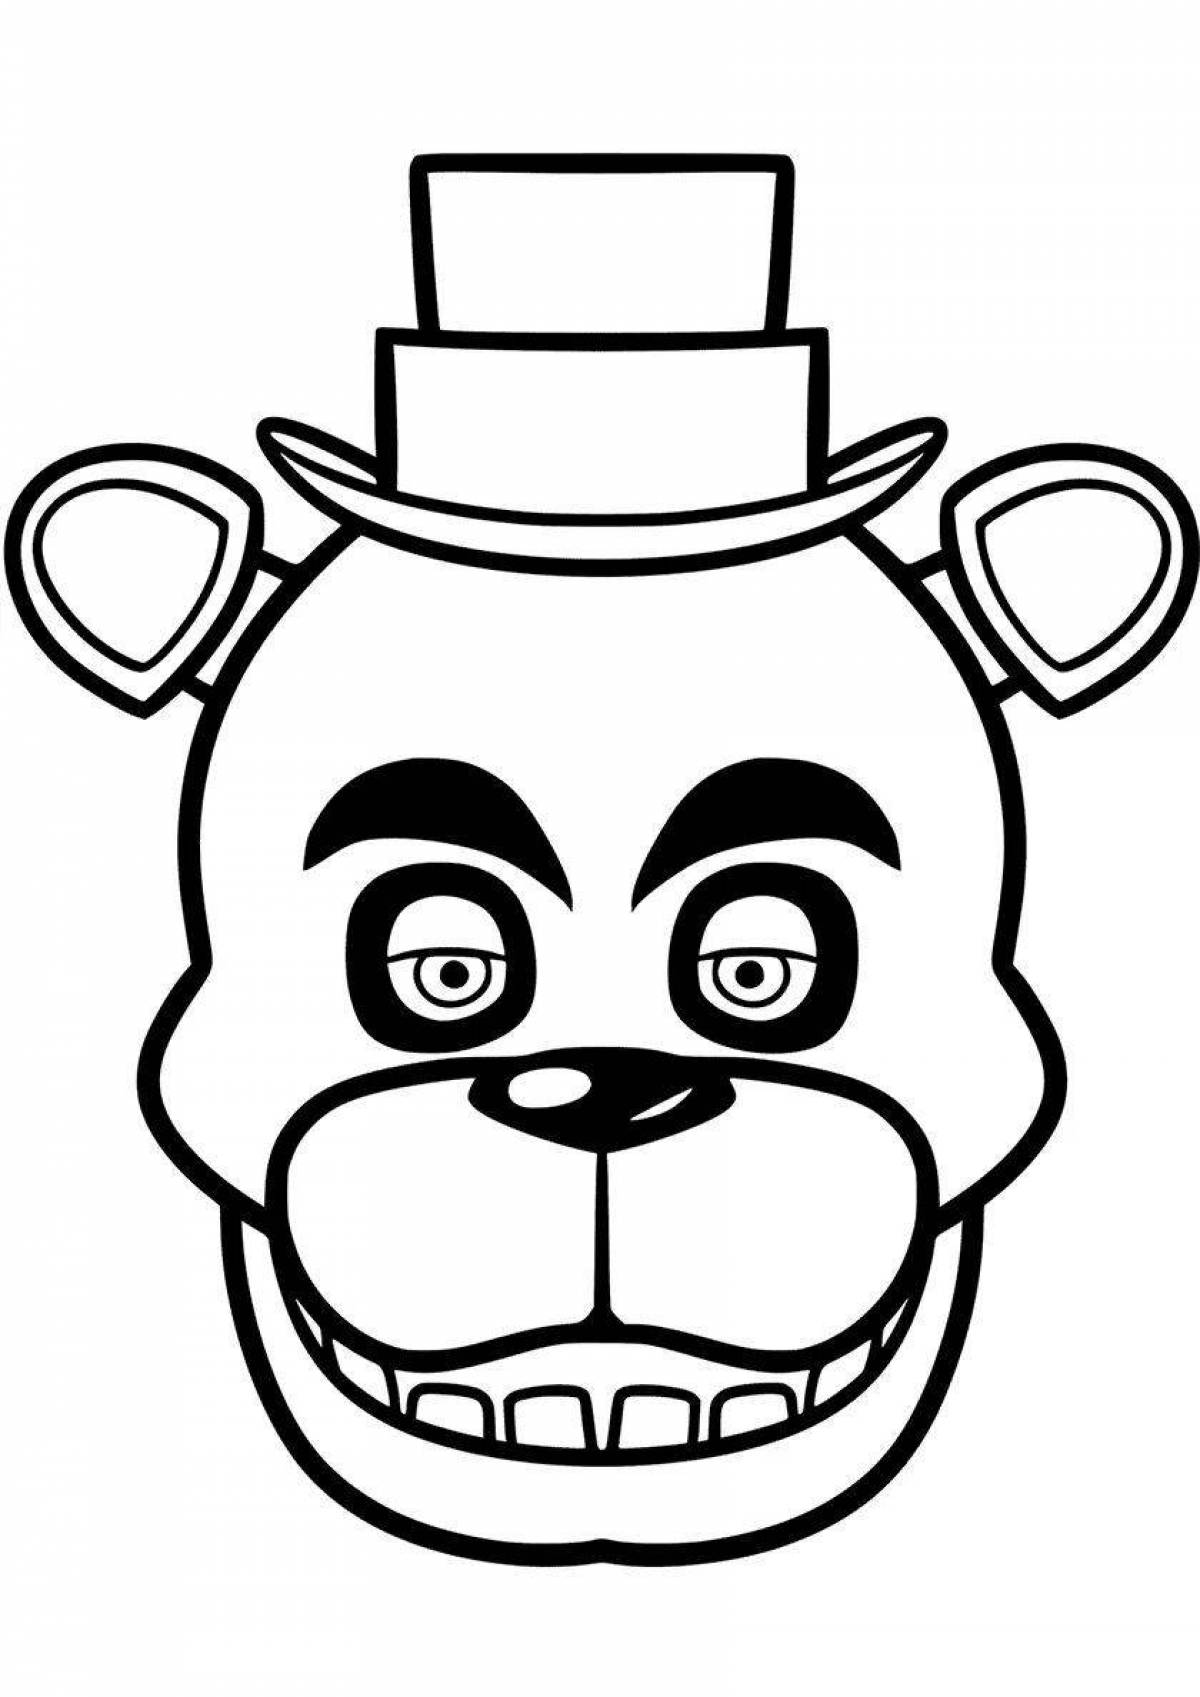 Colorful freddy fnaf coloring page